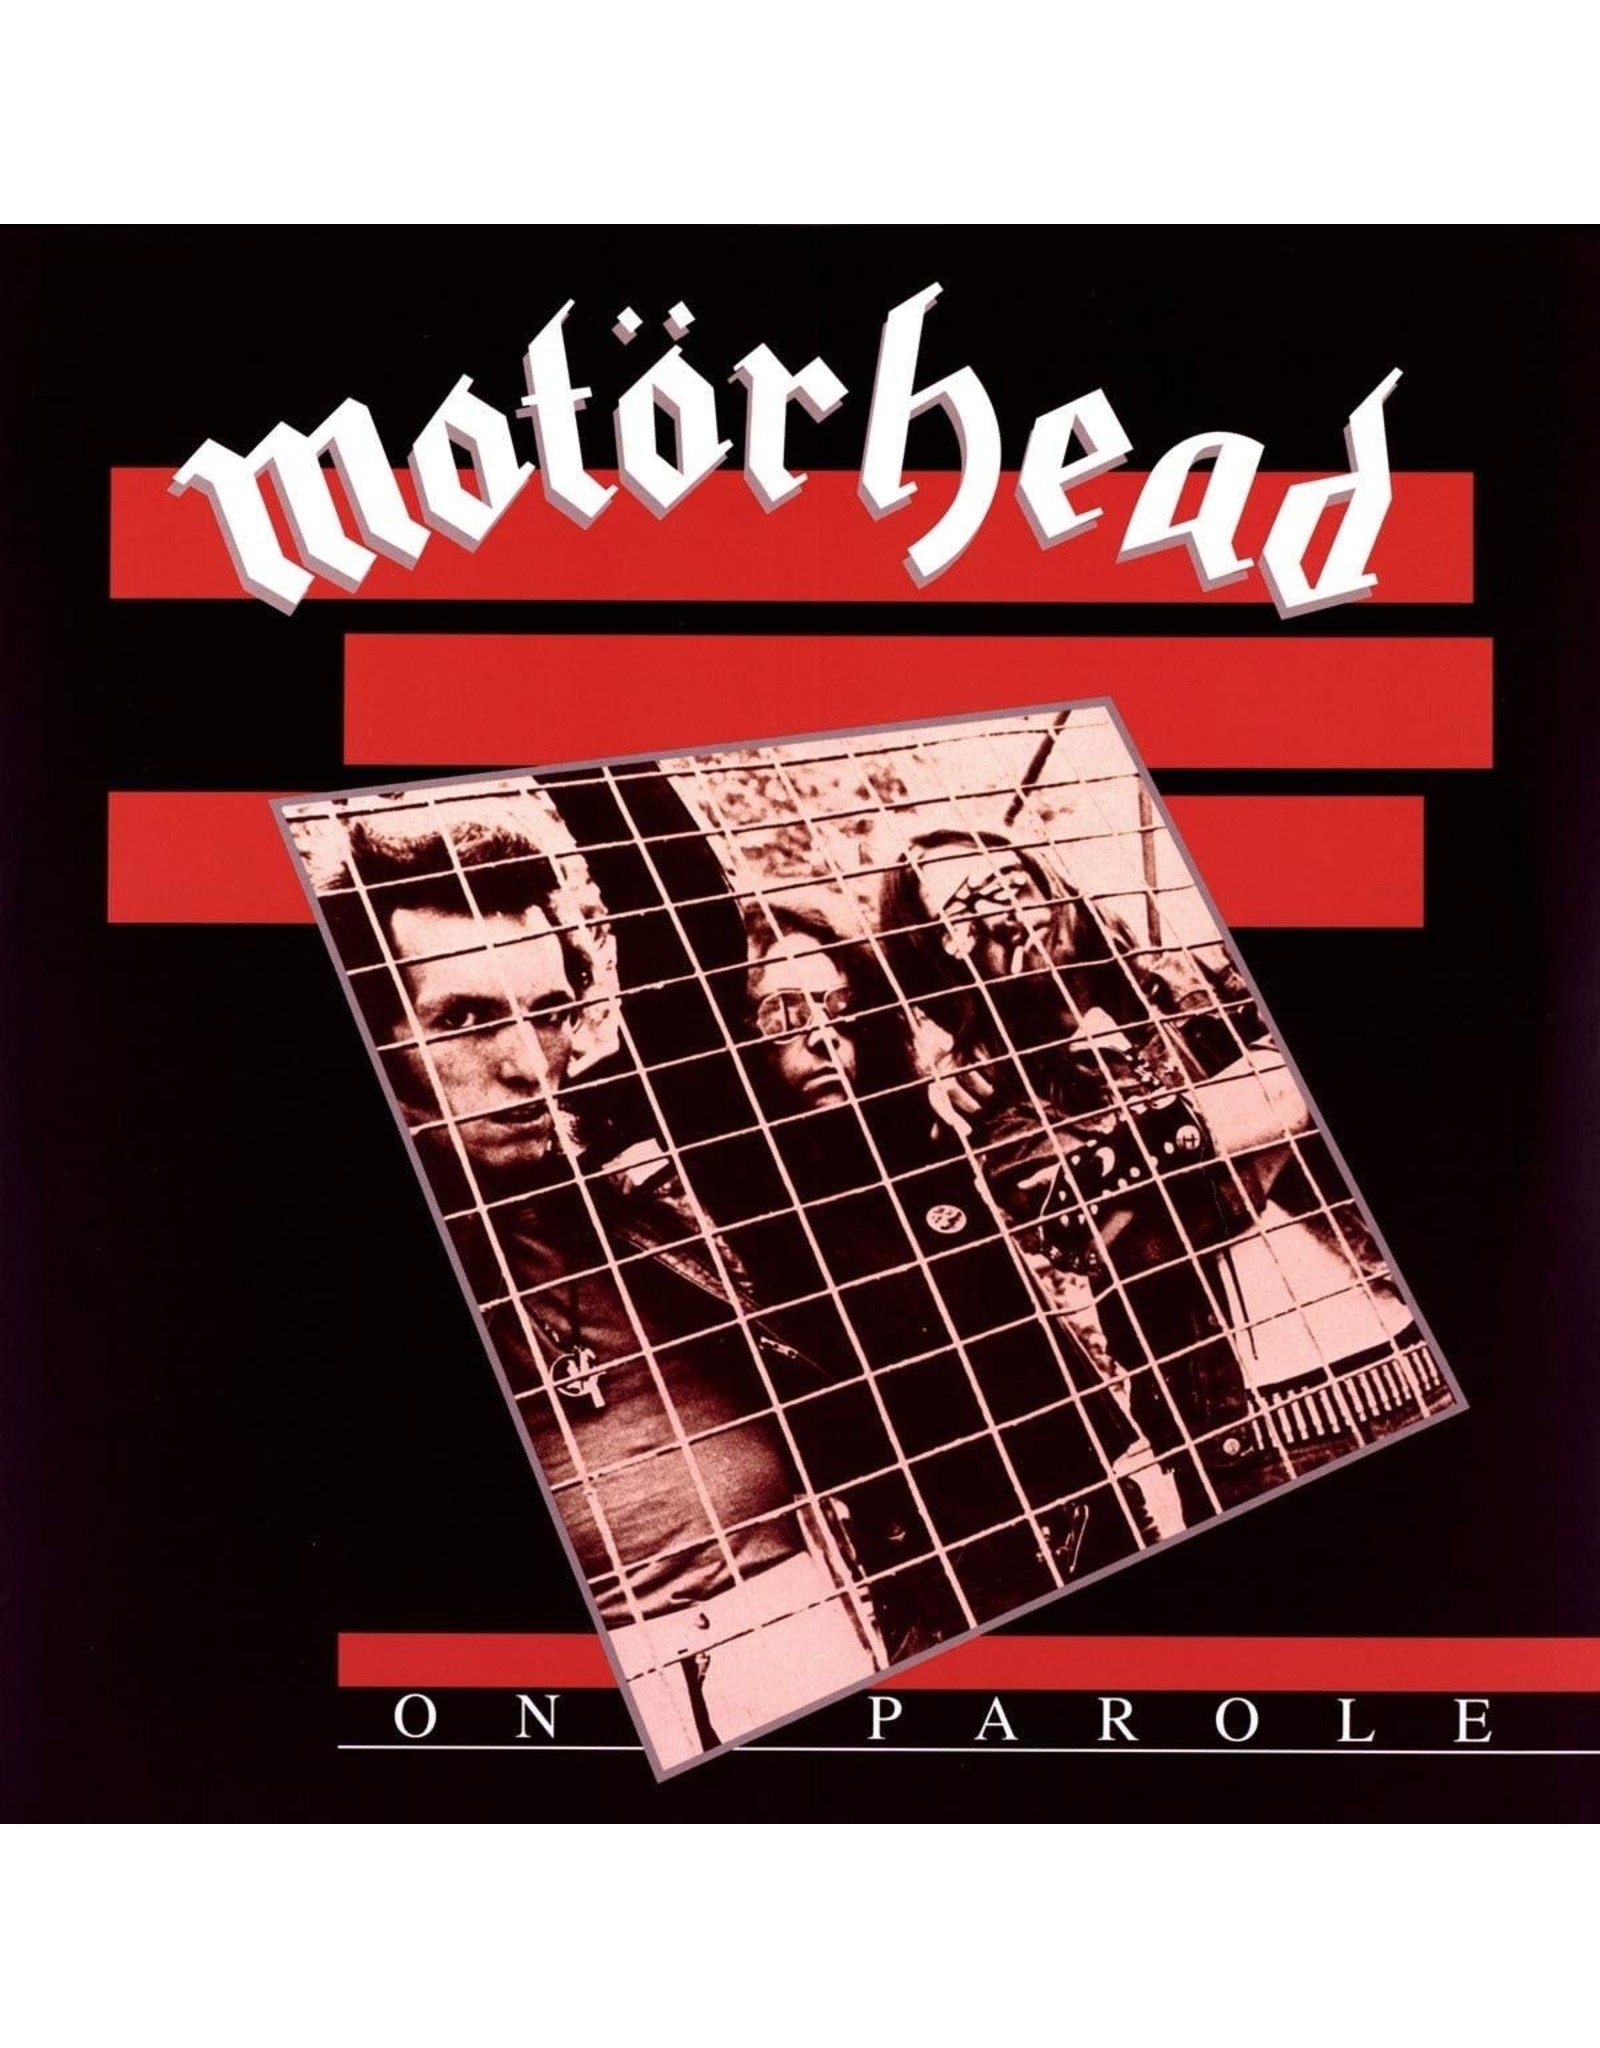 Motorhead - On Parole (Expanded And Remastered)